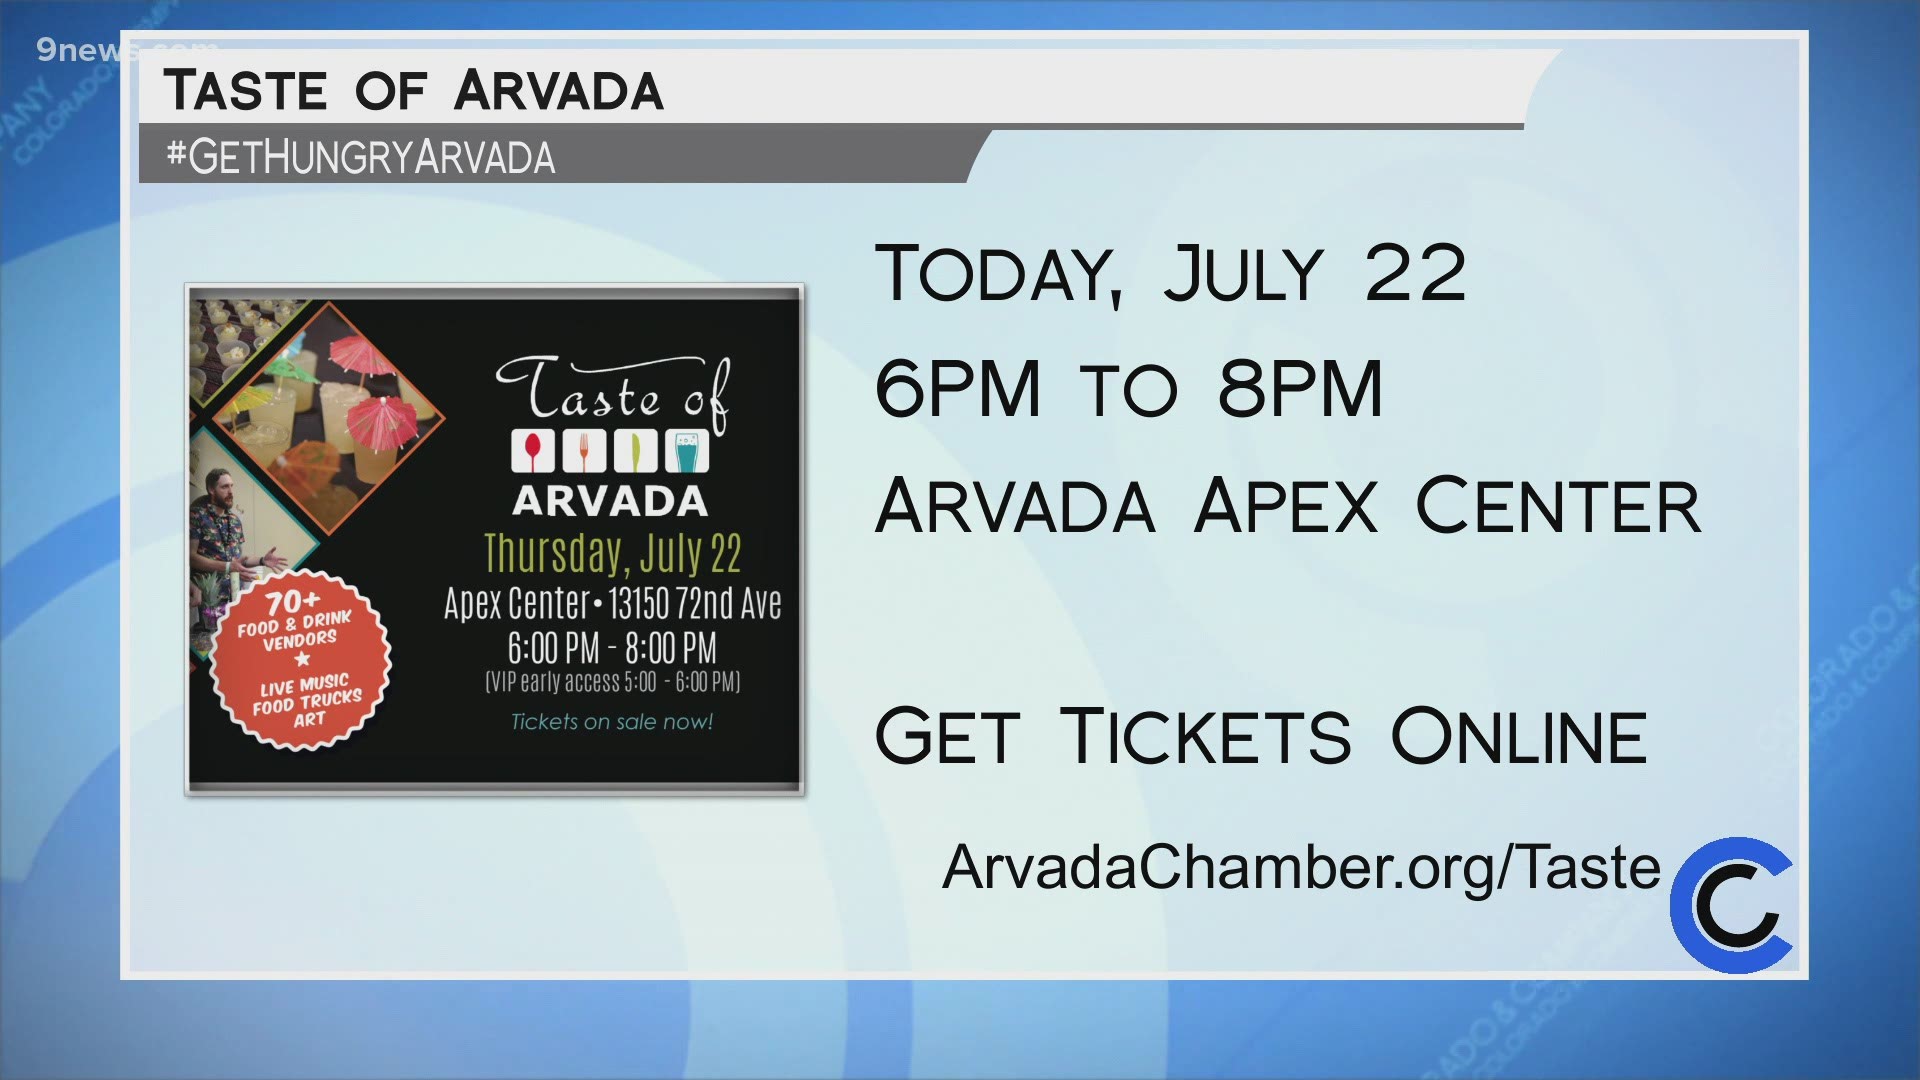 The 4th Annual Taste of Arvada is happening tonight from 6 to 8pm at the Apex Center! Get your tickets and learn more at ArvadaChamber.org/Taste.